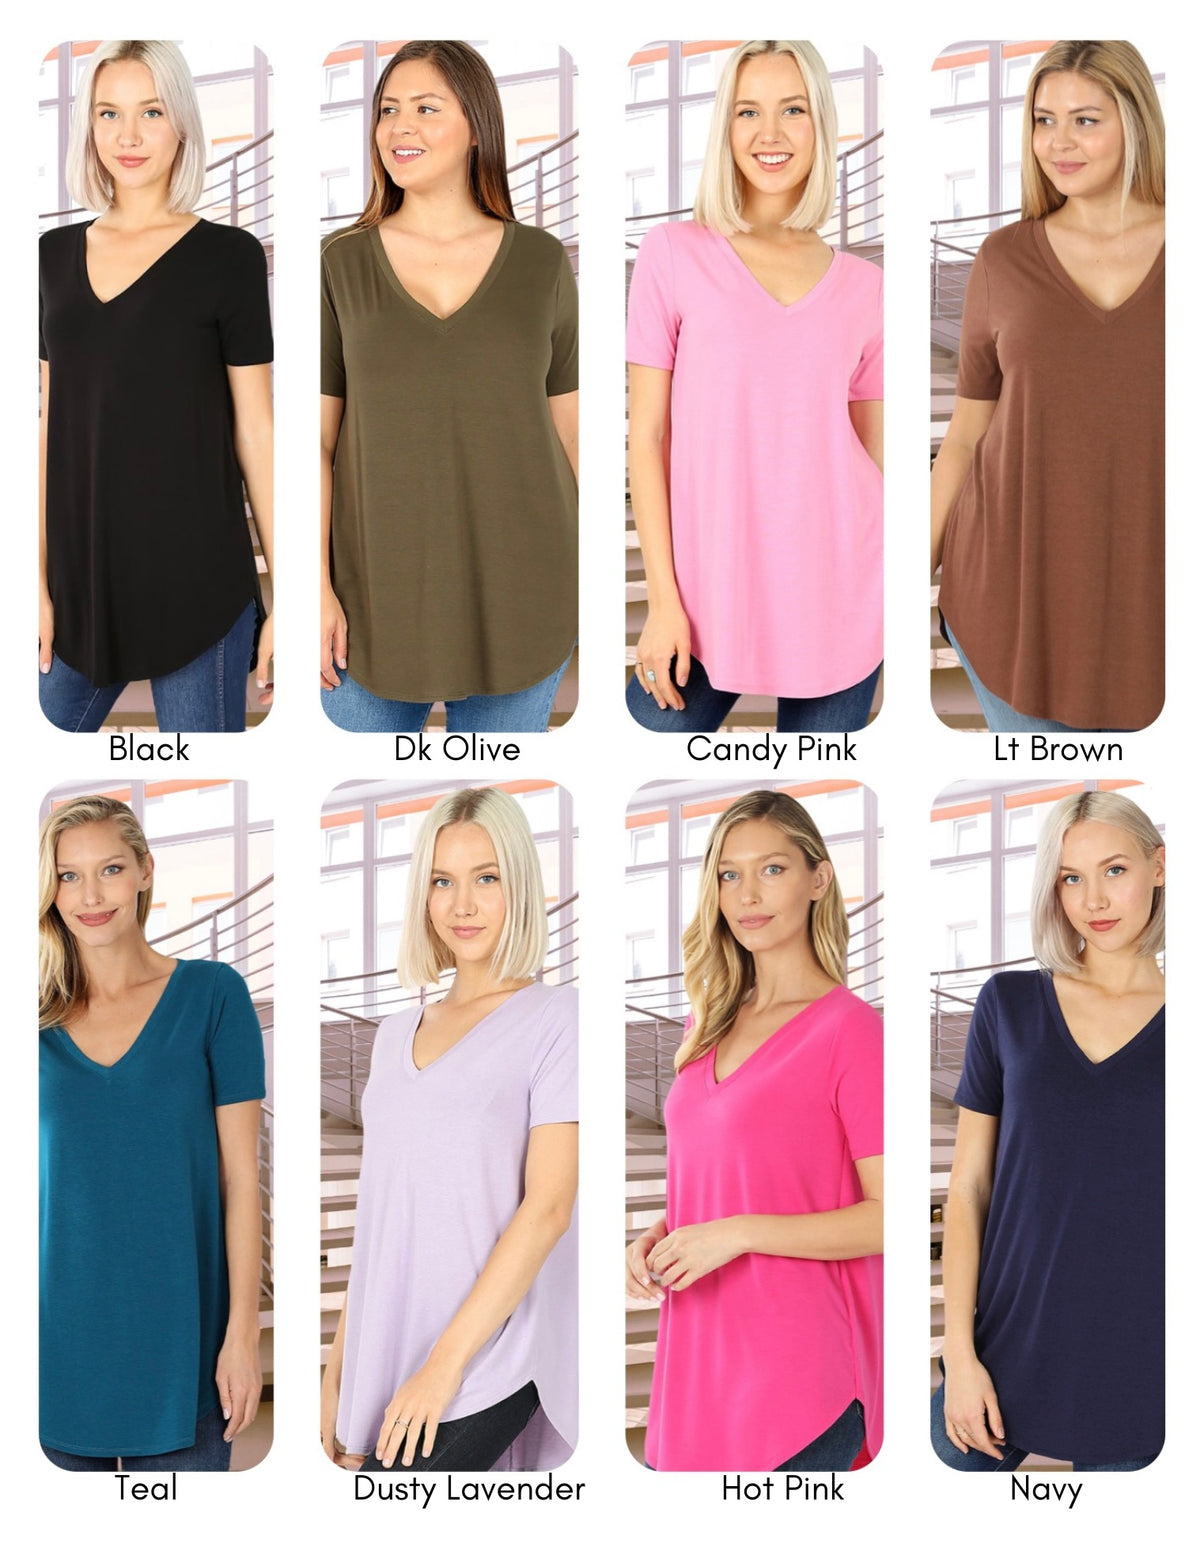 Short Sleeve V-Neck Rounded Curved Hem Stretchy Womens Shirt Top in several colors including: Black, Navy Blue, Candy Pink, Dark Olive Green, Dusty Lavender Purple, Hot Pink Fuschia, Light Brown, and Teal Blue | All Sizes | Small-3XL | Regular & Plus Sizes 